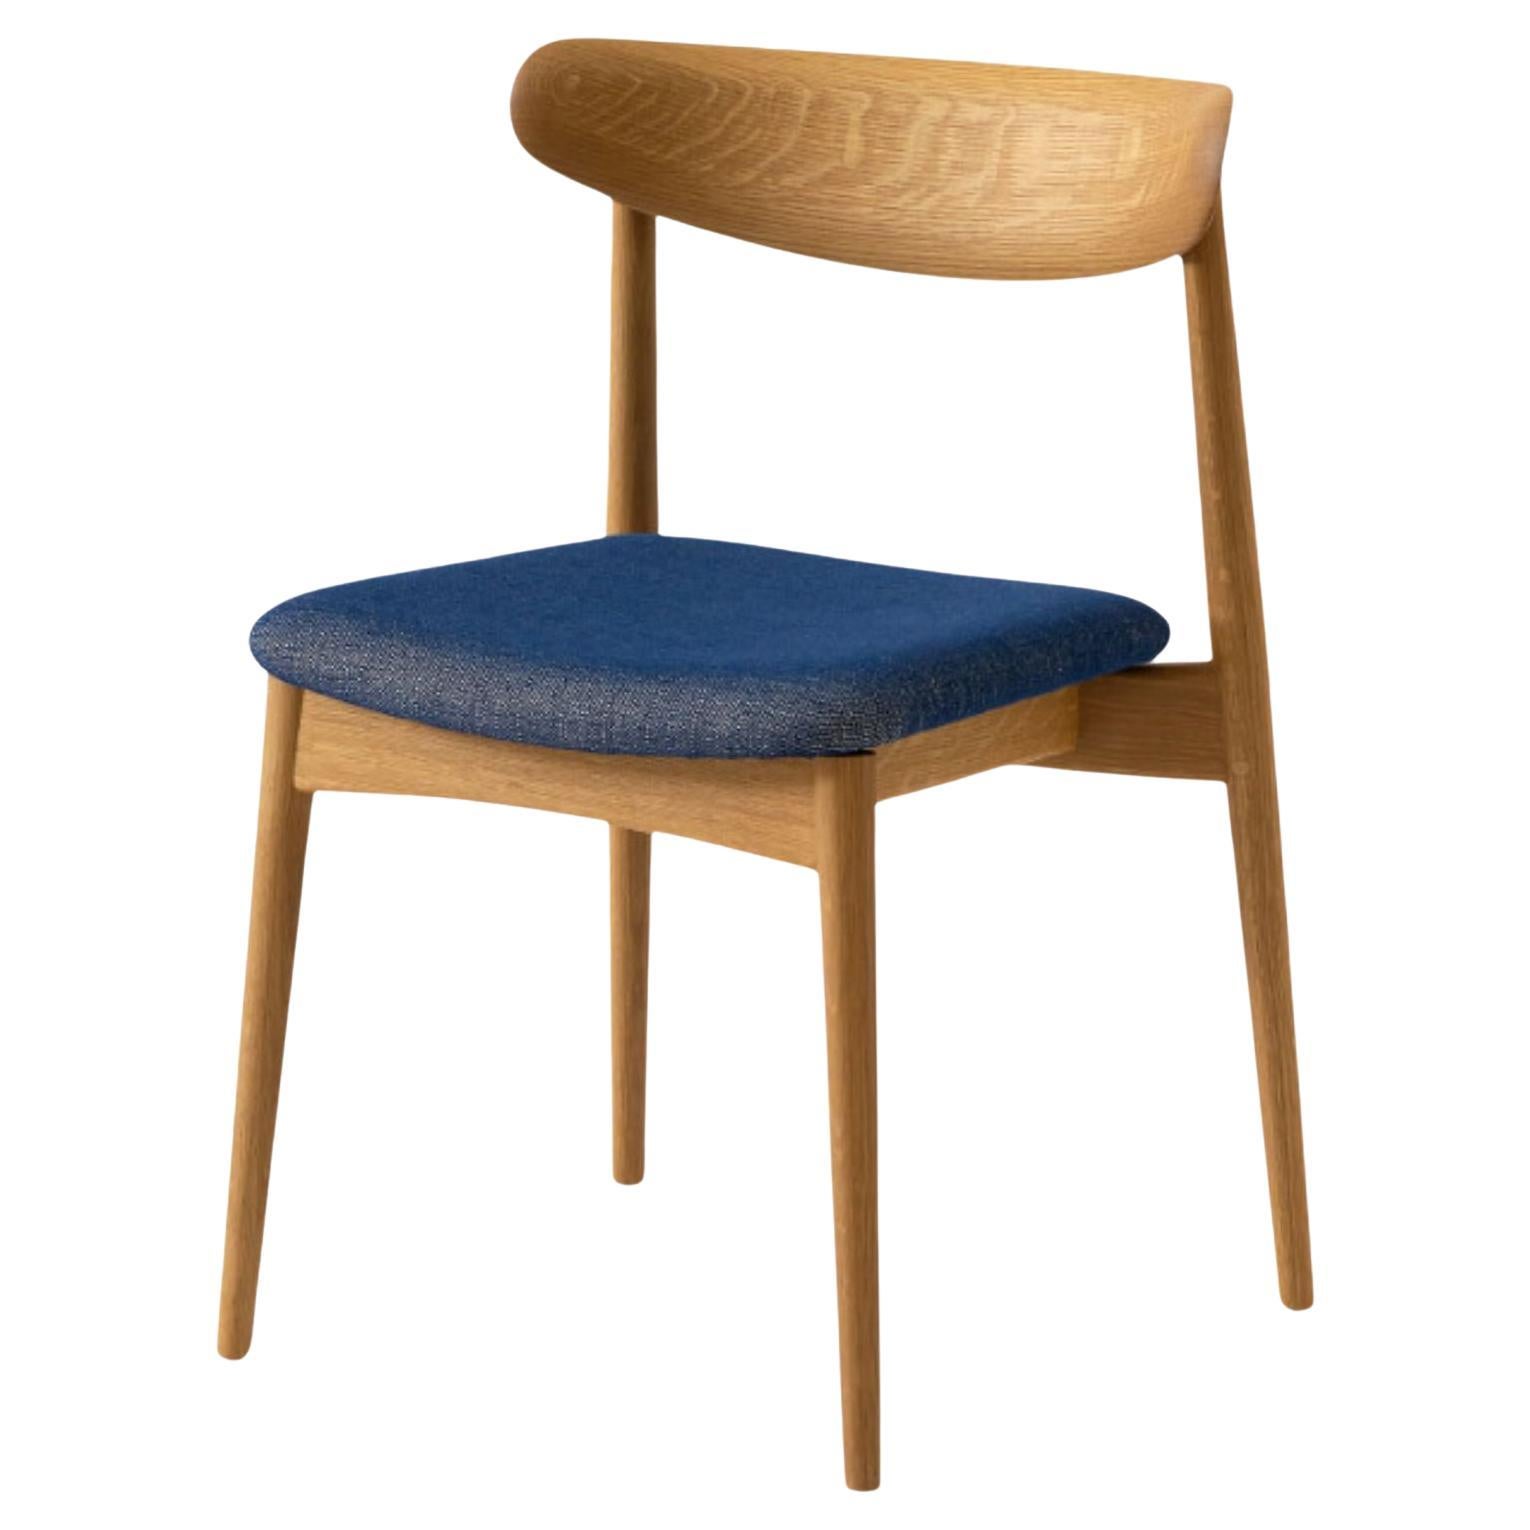 Motomi Kawakami 'Seoto KD201' Dining Chair in Oak and Upholstery for Hida For Sale